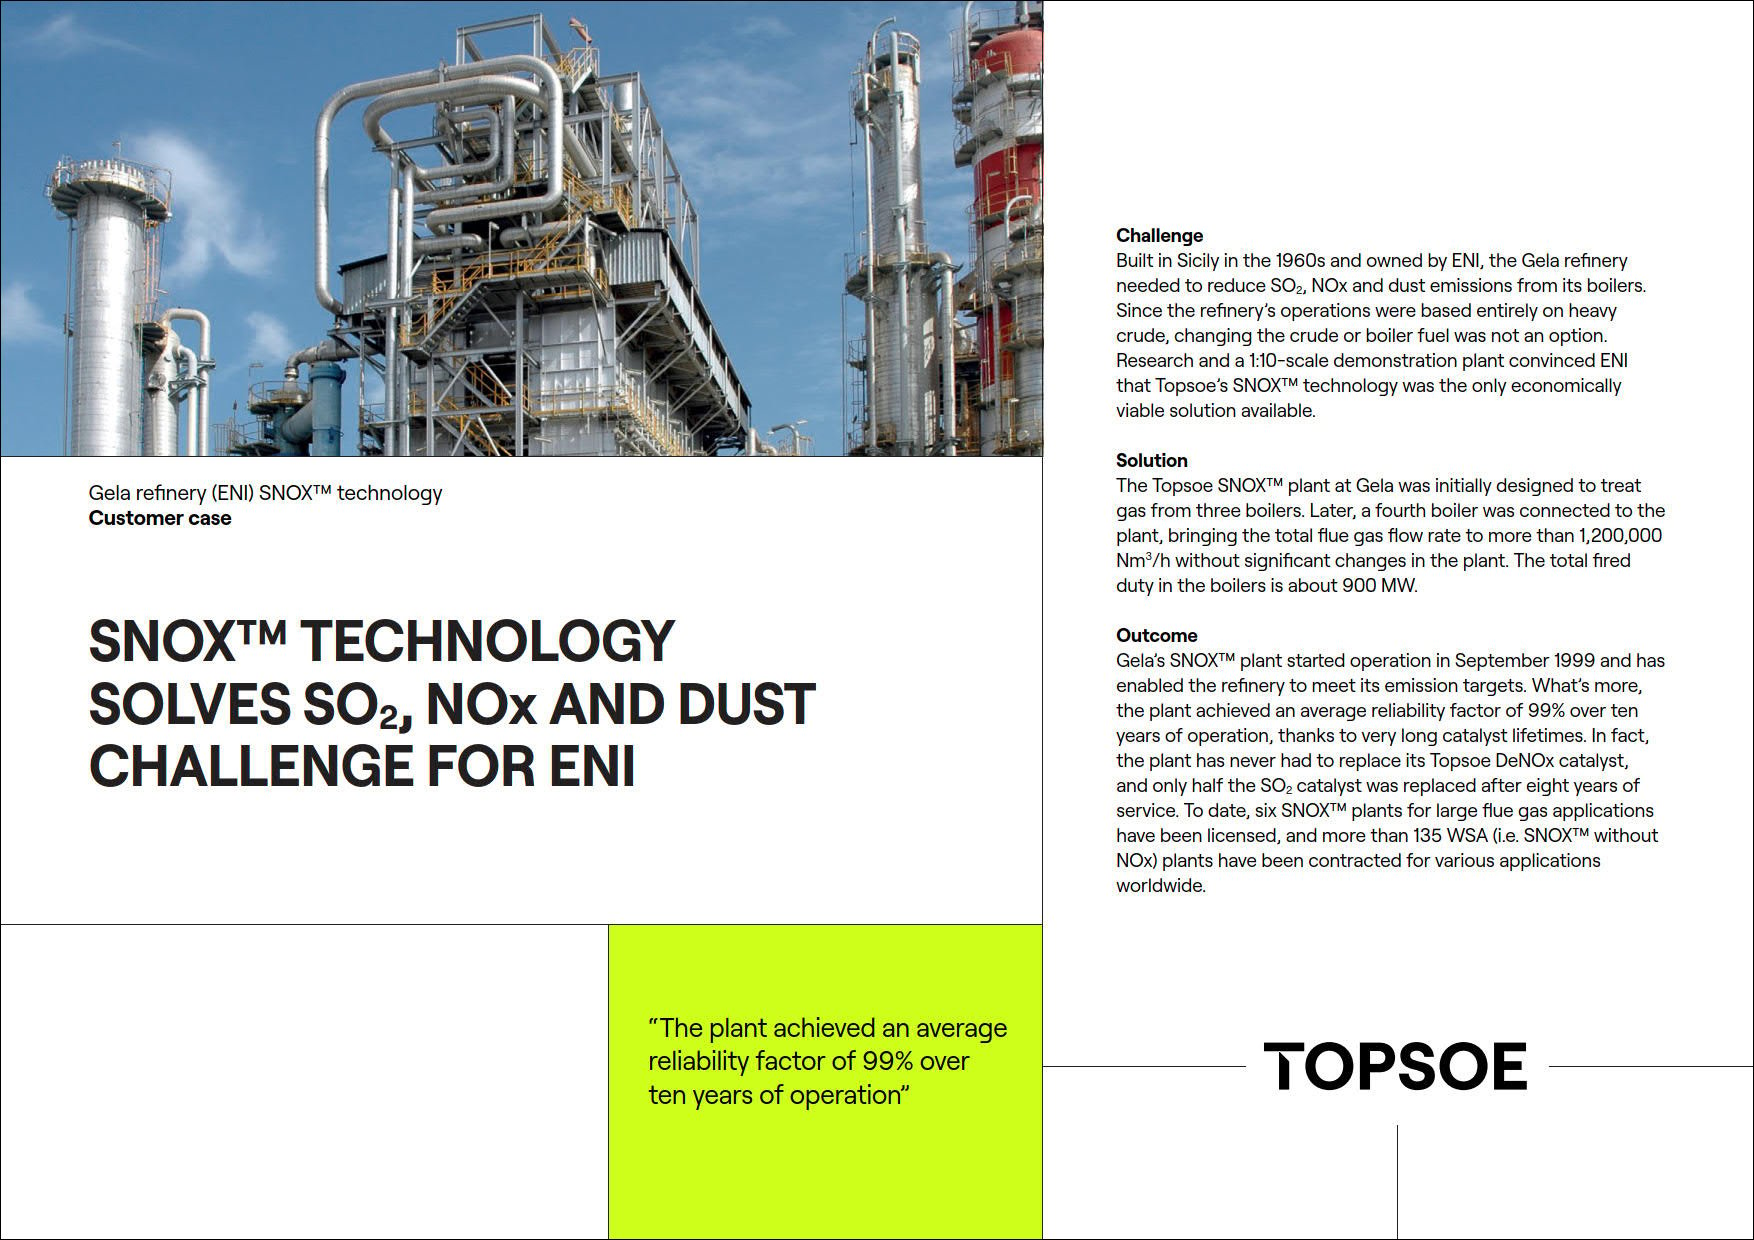 SNOX™ technology solves SO2, NOx and dust challenge for ENI